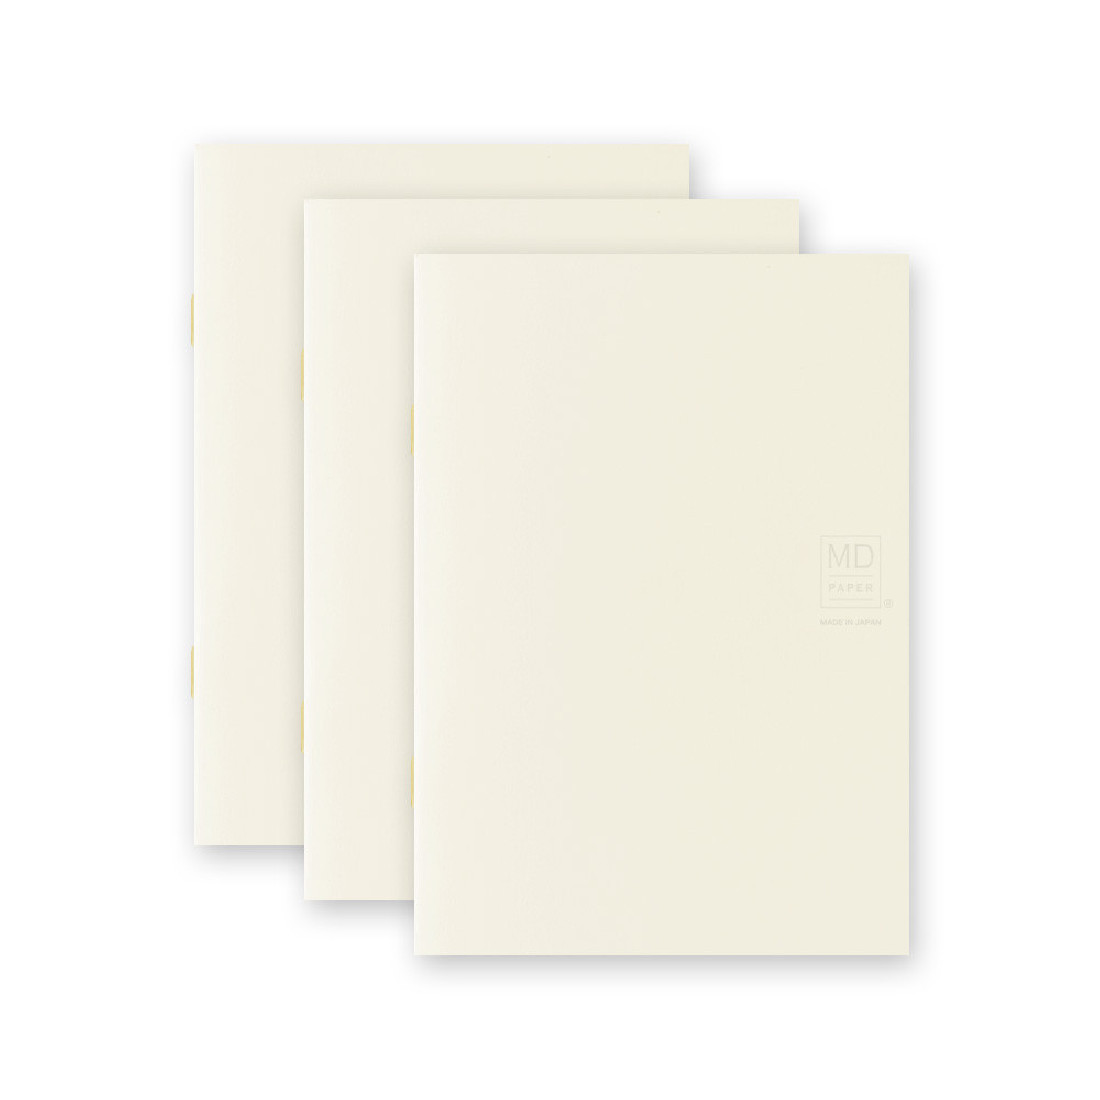 Midori MD Notebook Light A6 148x105mm, Lined, 3pcs pack, Label stickers, Saddle Stitched, 48 pages each, 15298006